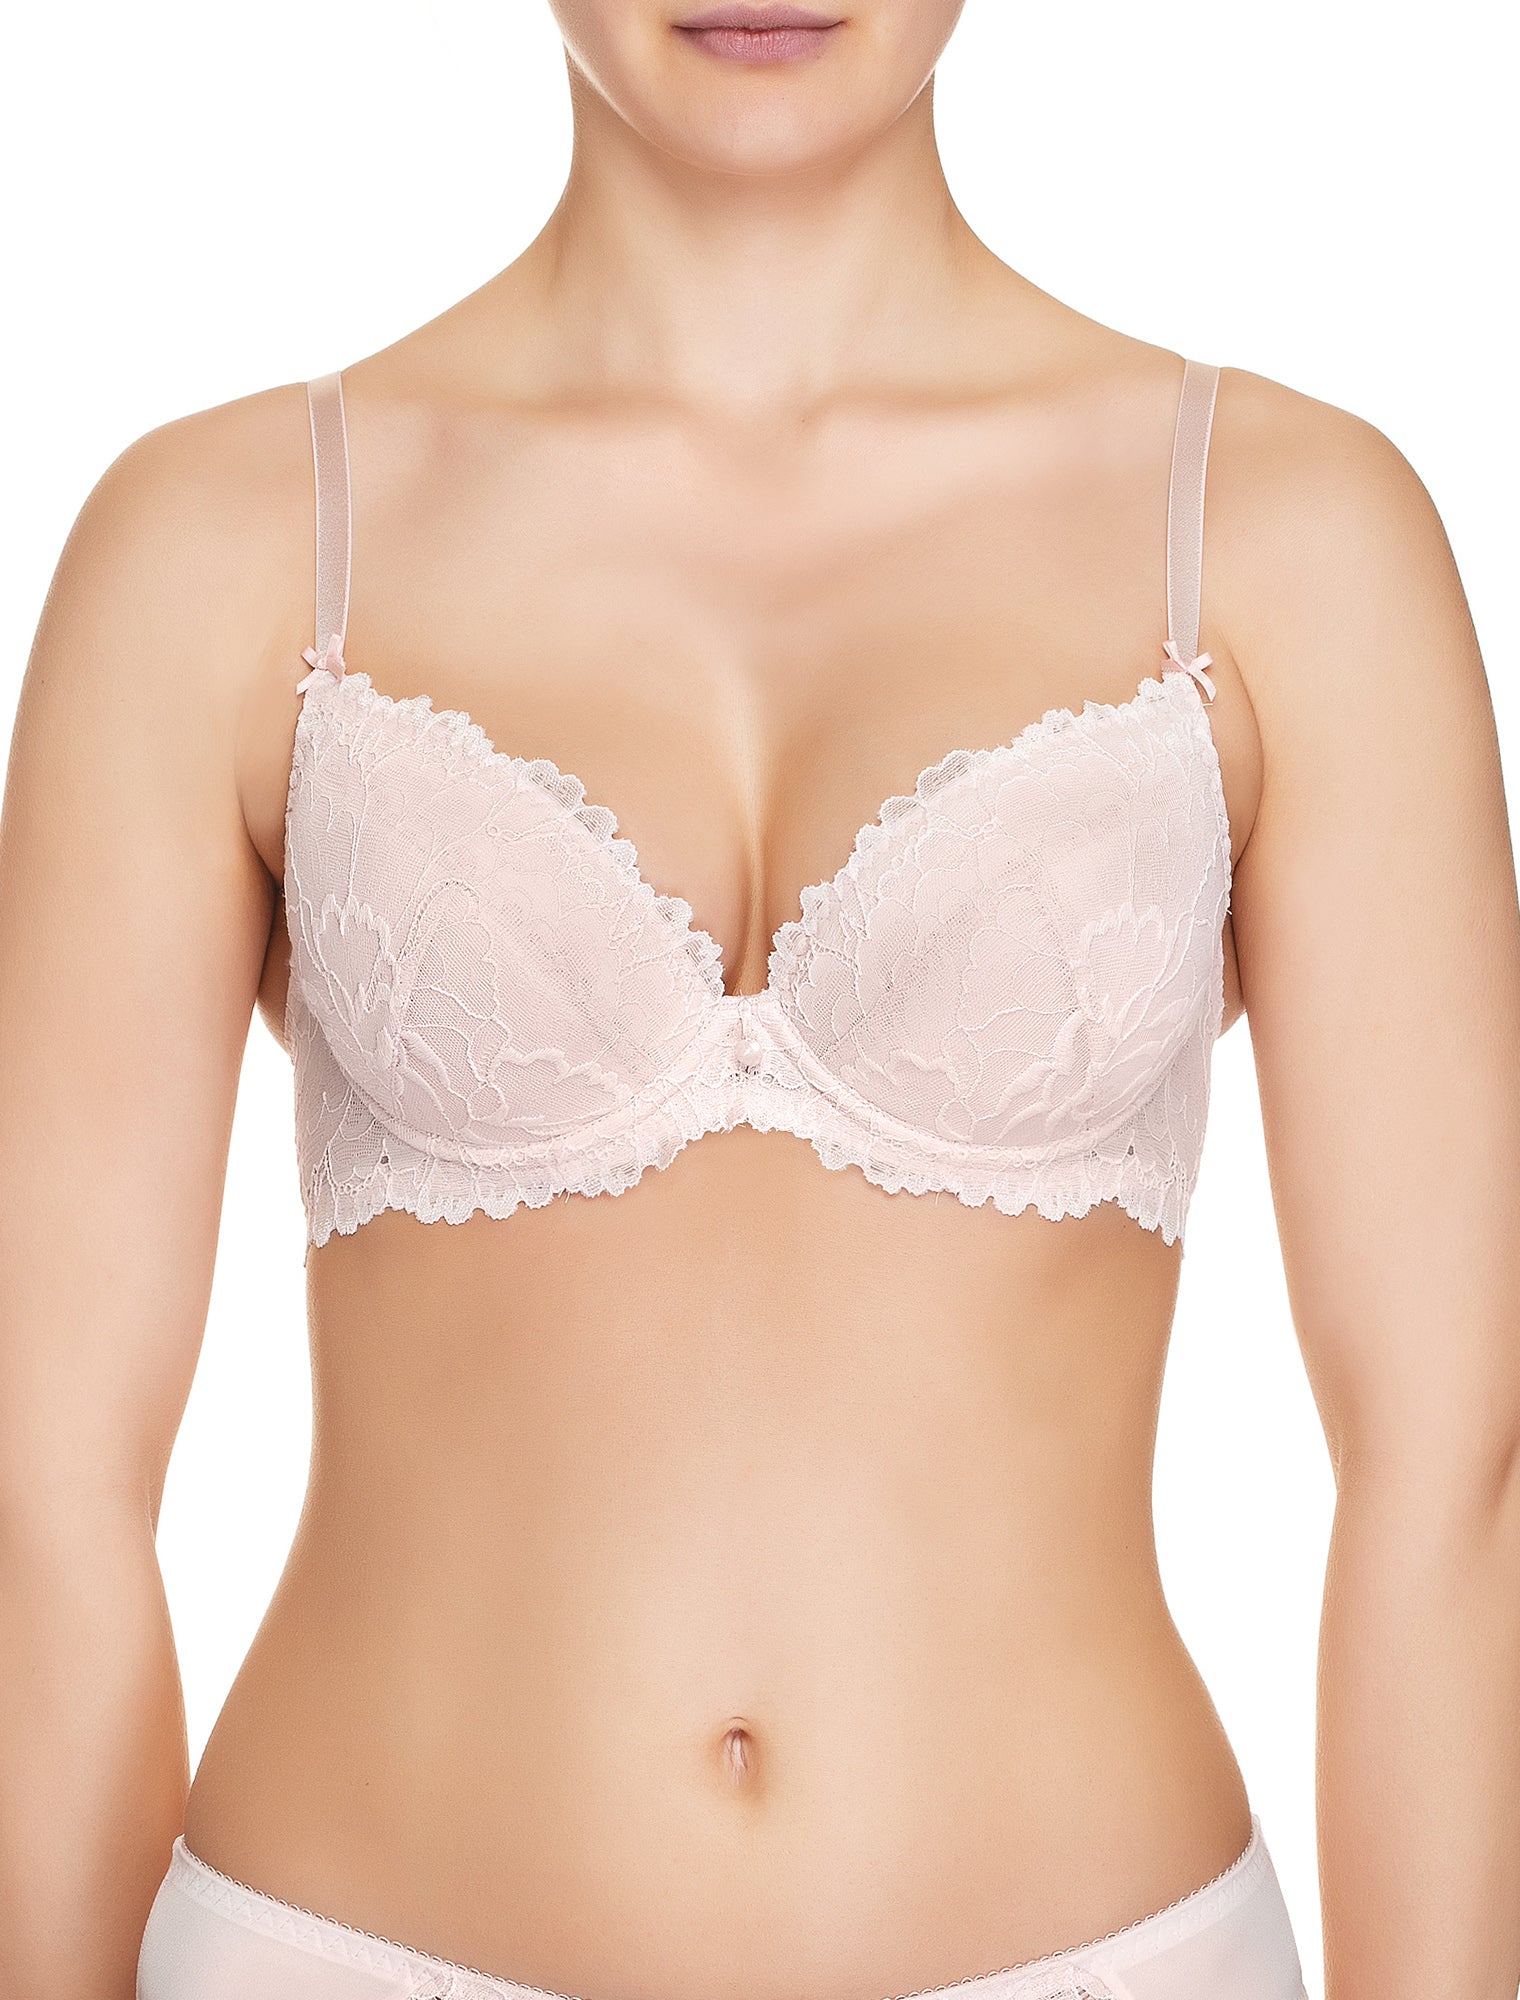 Time For Your First Bra – Lauma Lingerie